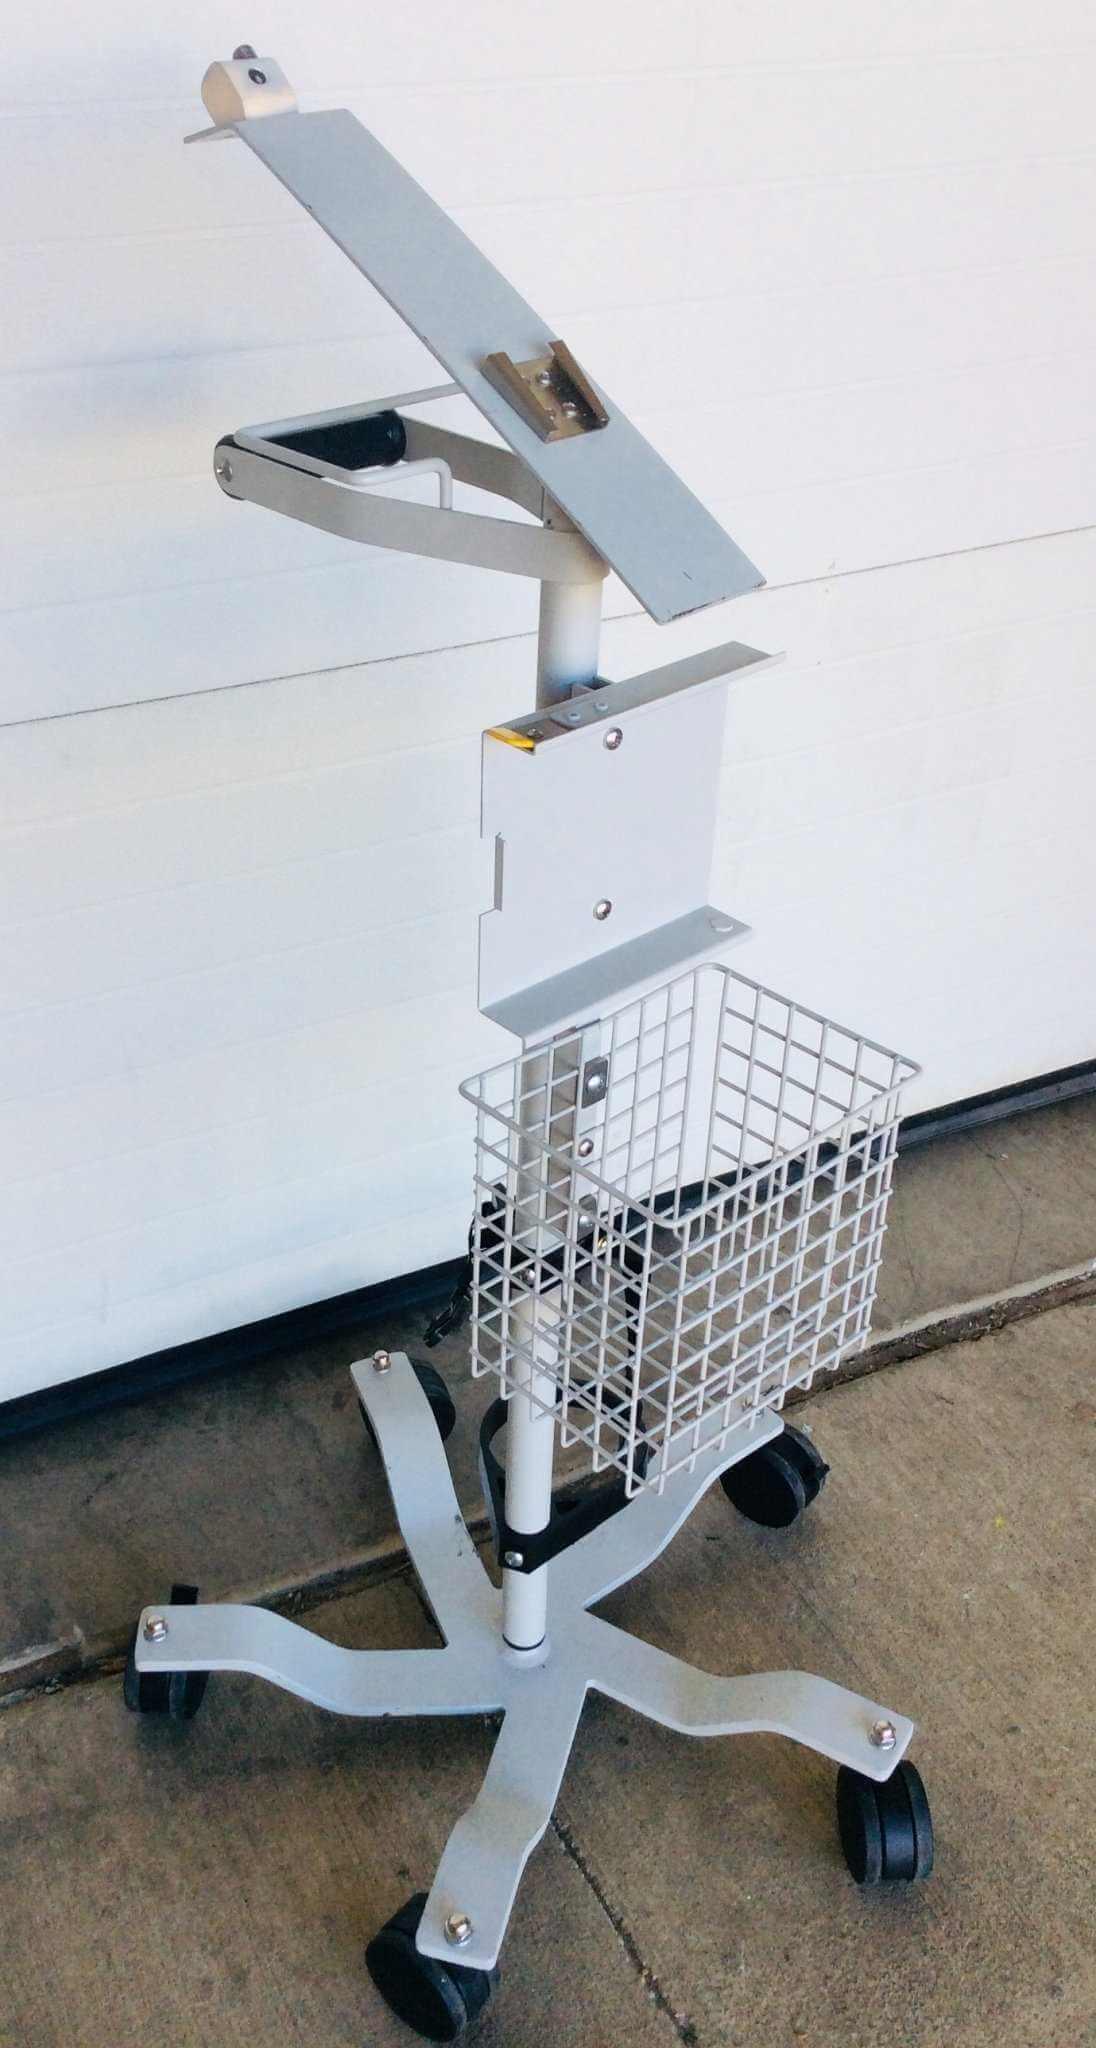 USED CareFusion LTV and LTM Rolling Cart Stand with SprintPack Holder and Basket 10611 19096-001 Warranty FREE Shipping - MBR Medicals